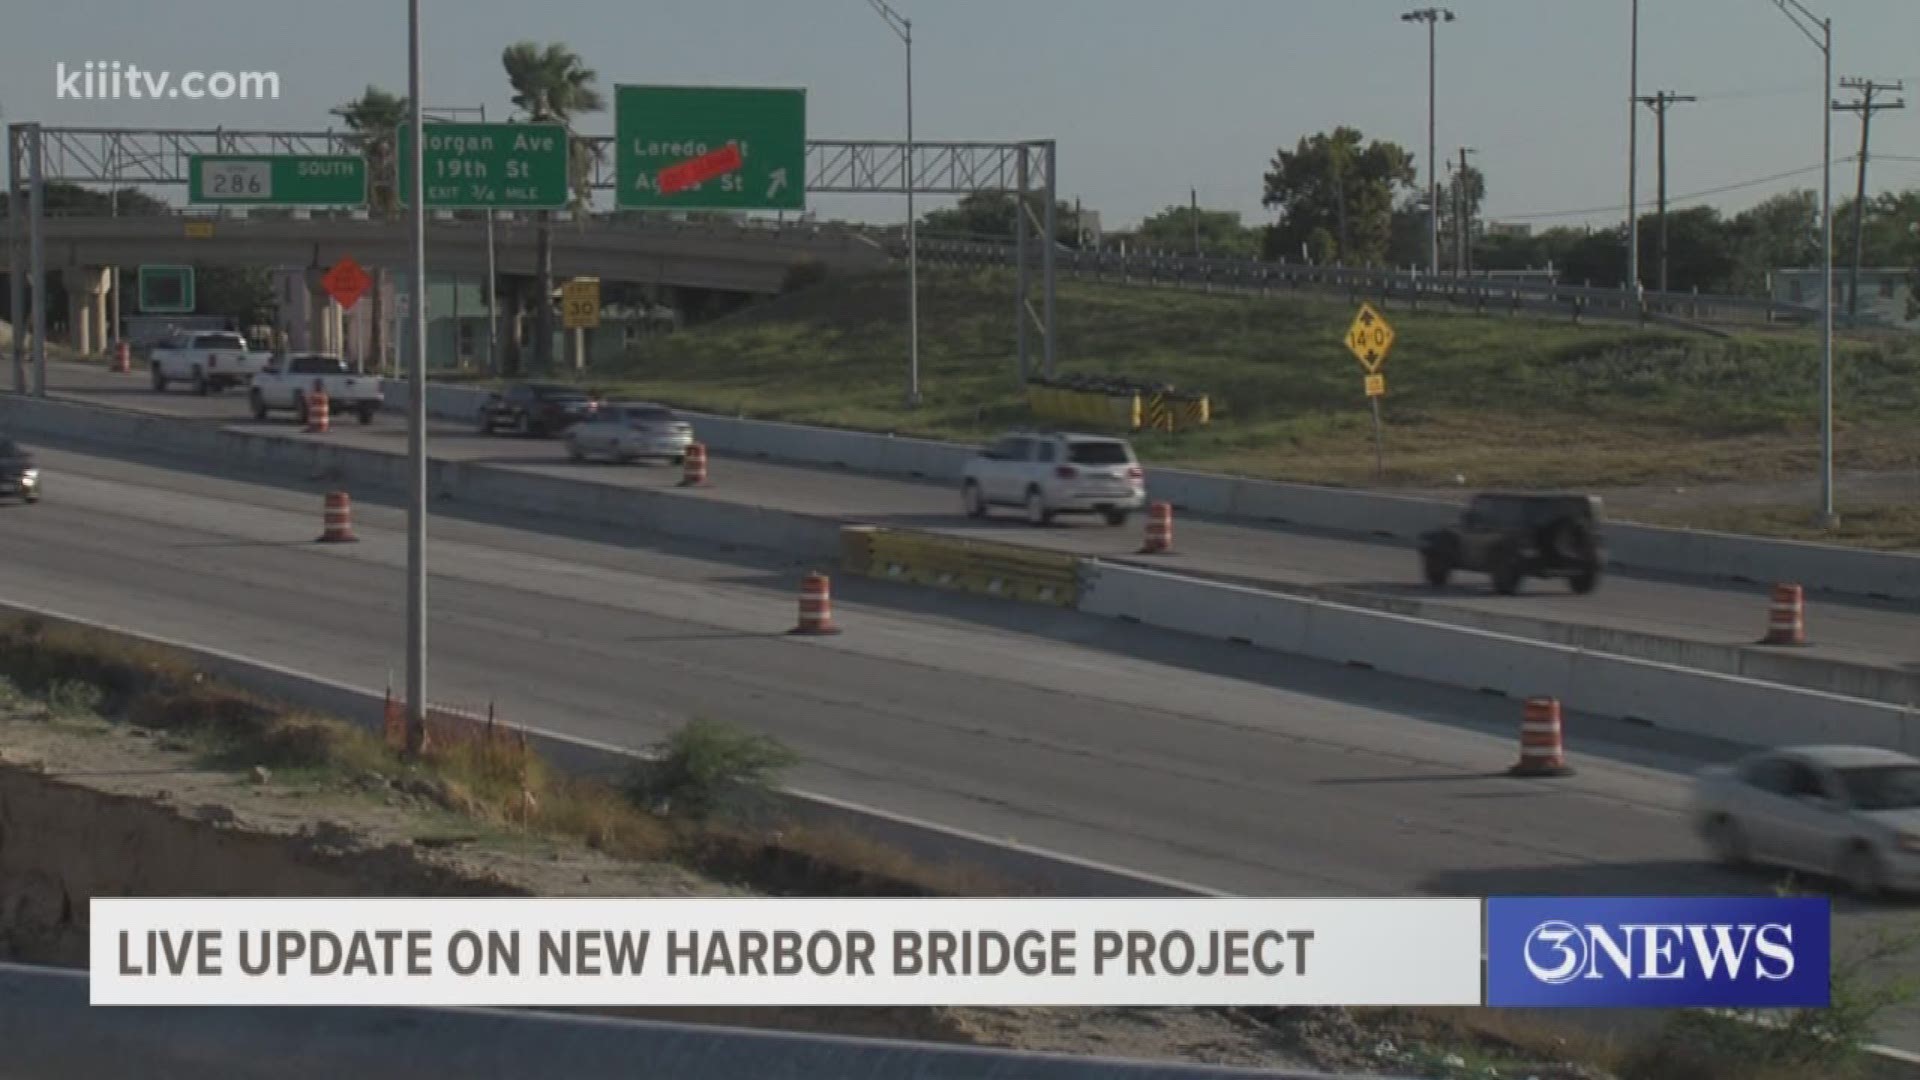 There have been recent changes in the downtown area of Corpus Christi due to the new Harbor Bridge project.